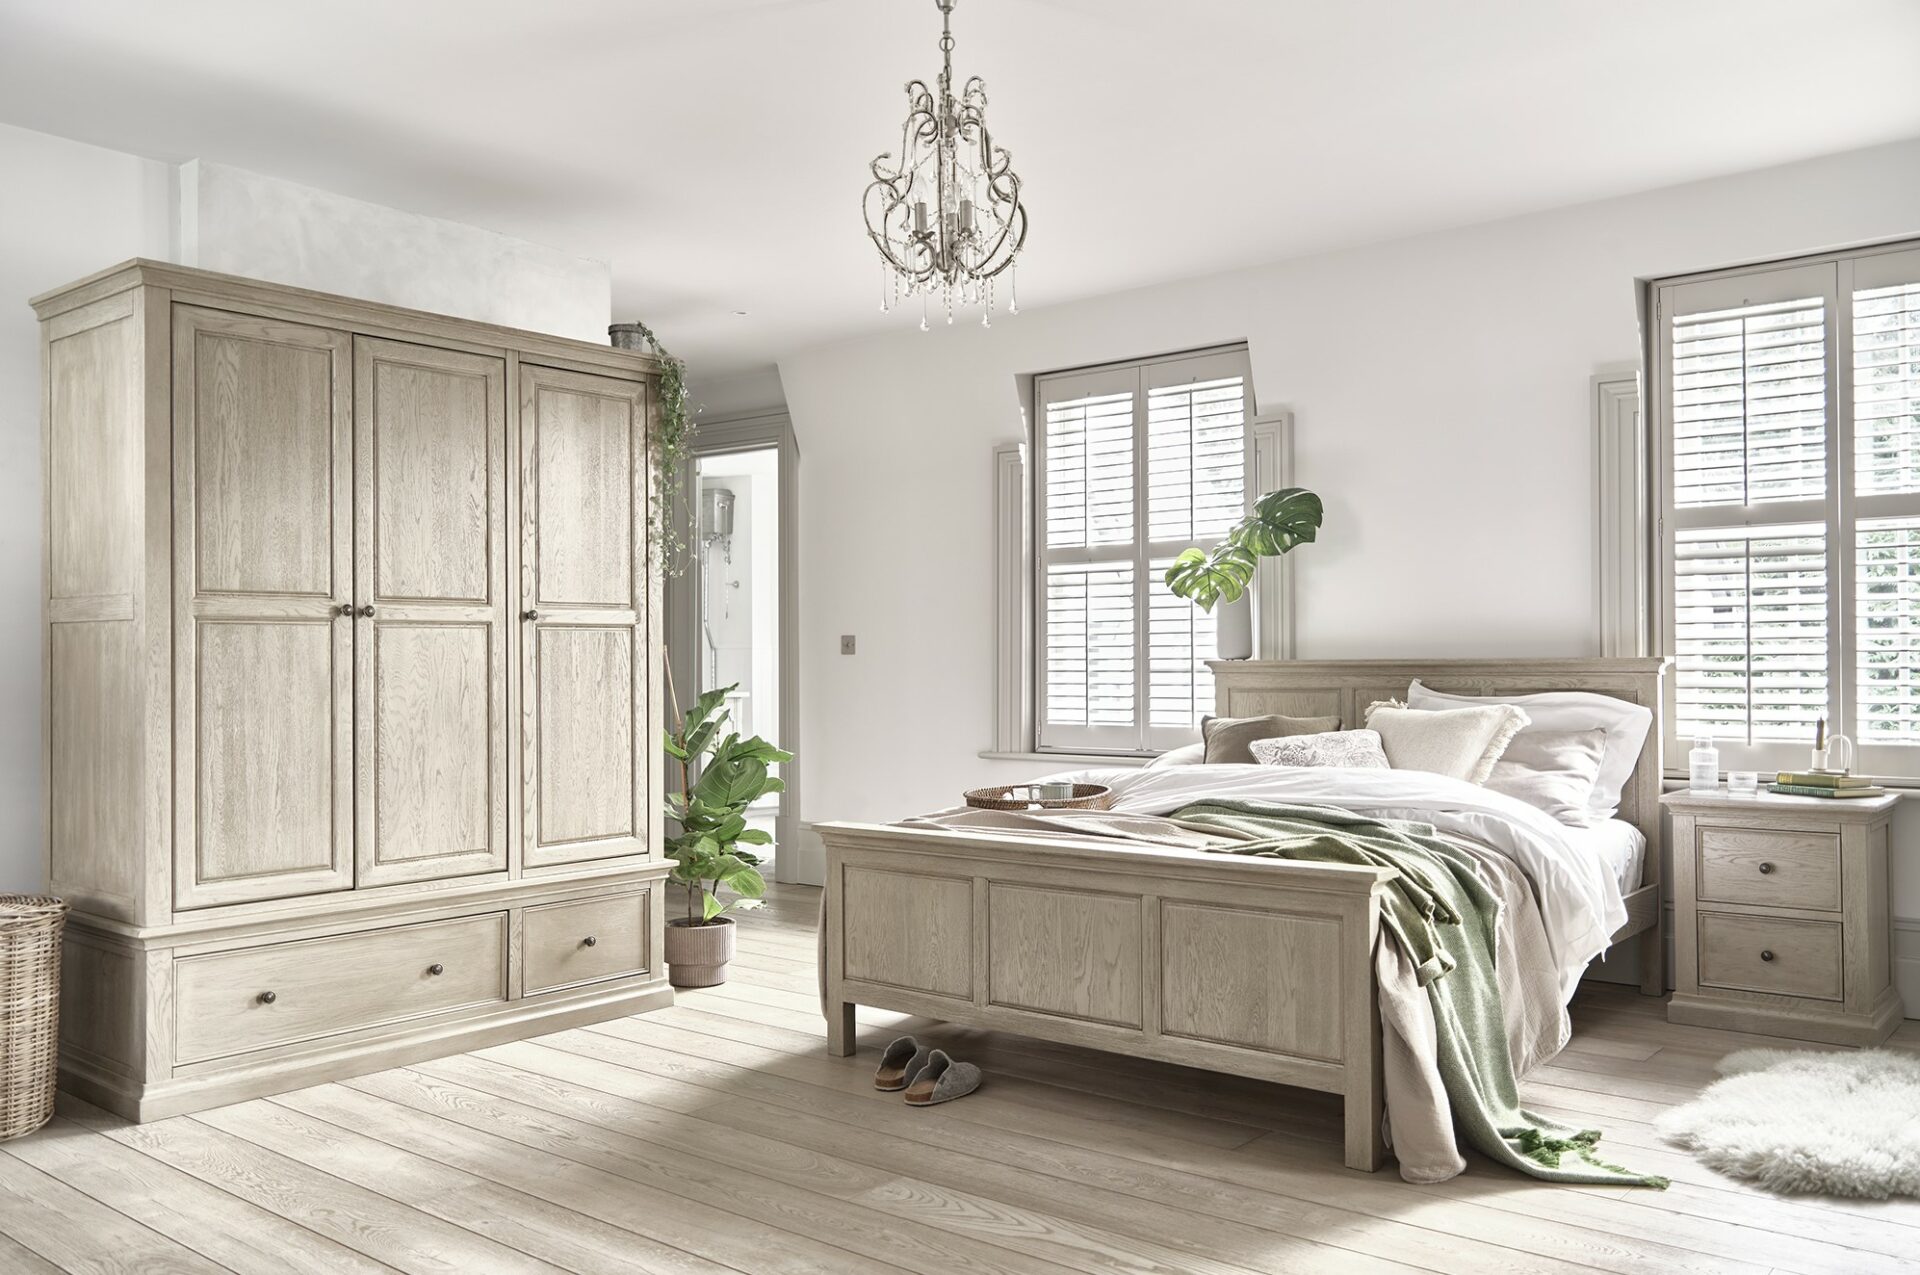 Oak Furnitureland Burleigh weathered oak bedroom furniture in a calm bedroom scheme with neutral styling.